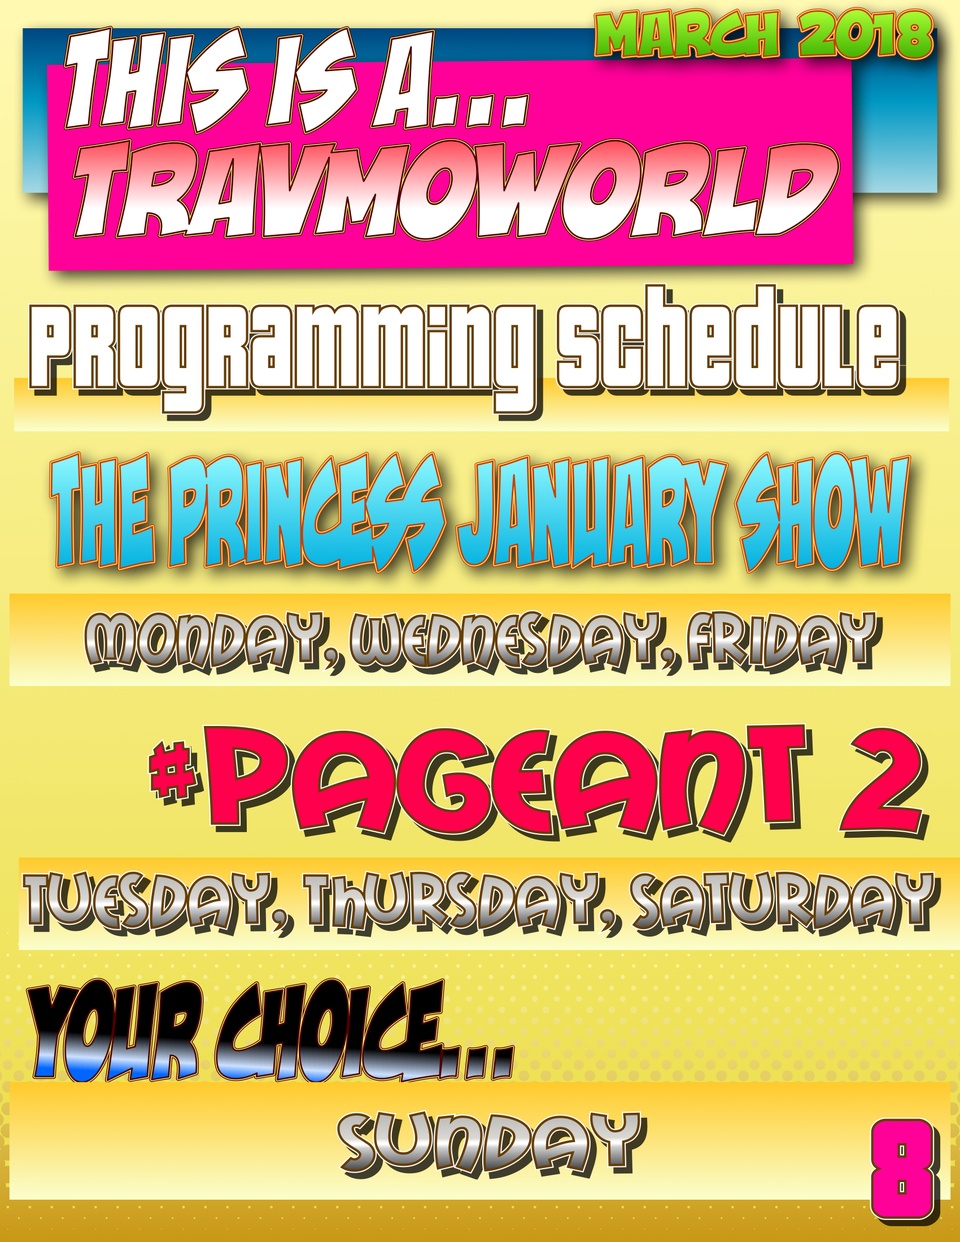 The Princess January Show : Season 2 : Episode 4 : March 2018 : Pg. 8